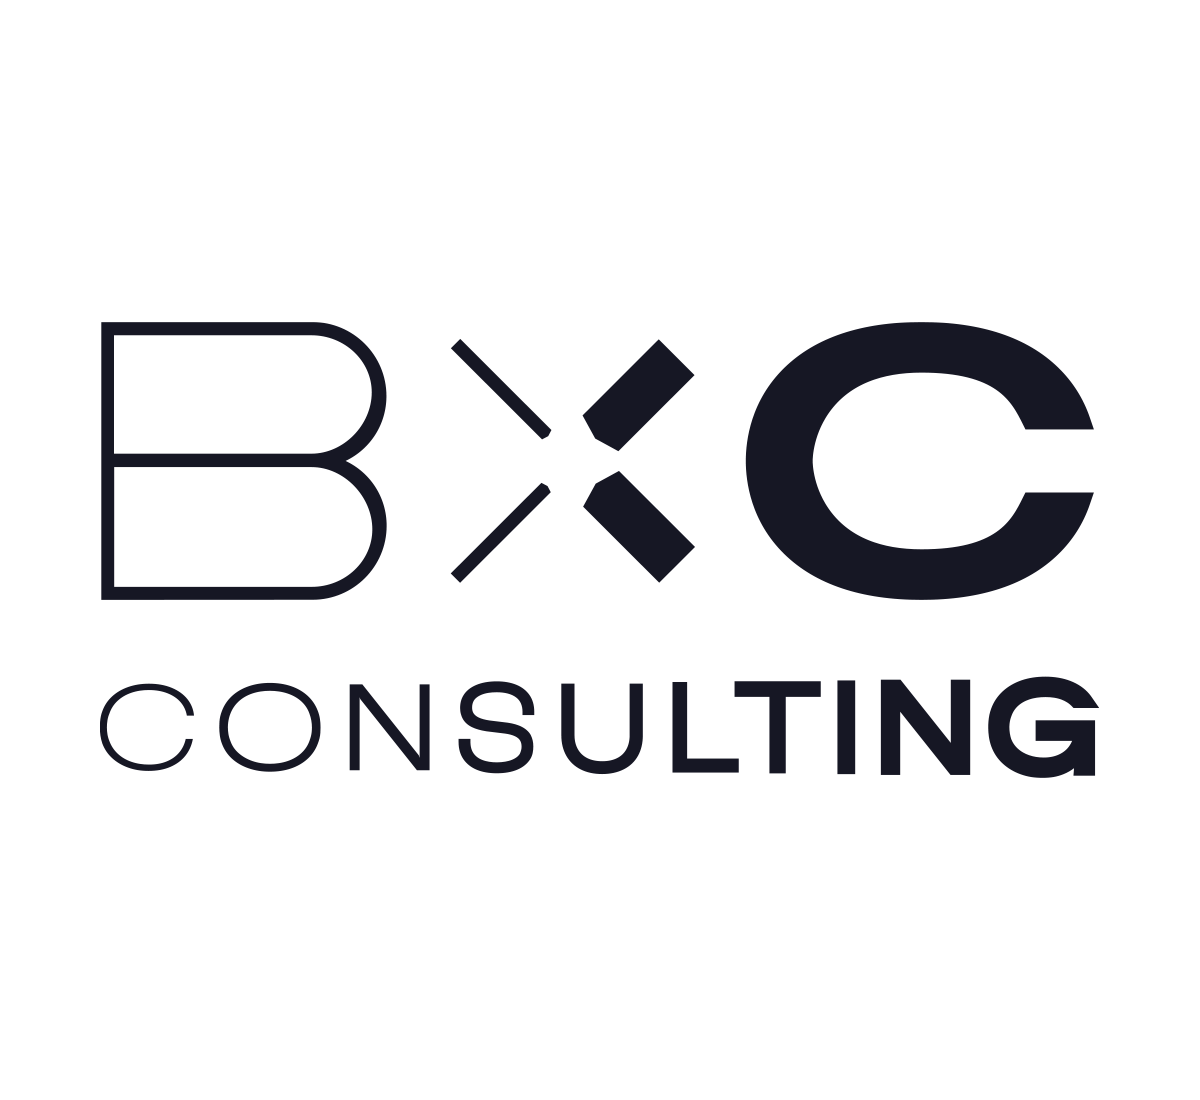 BxC Consulting